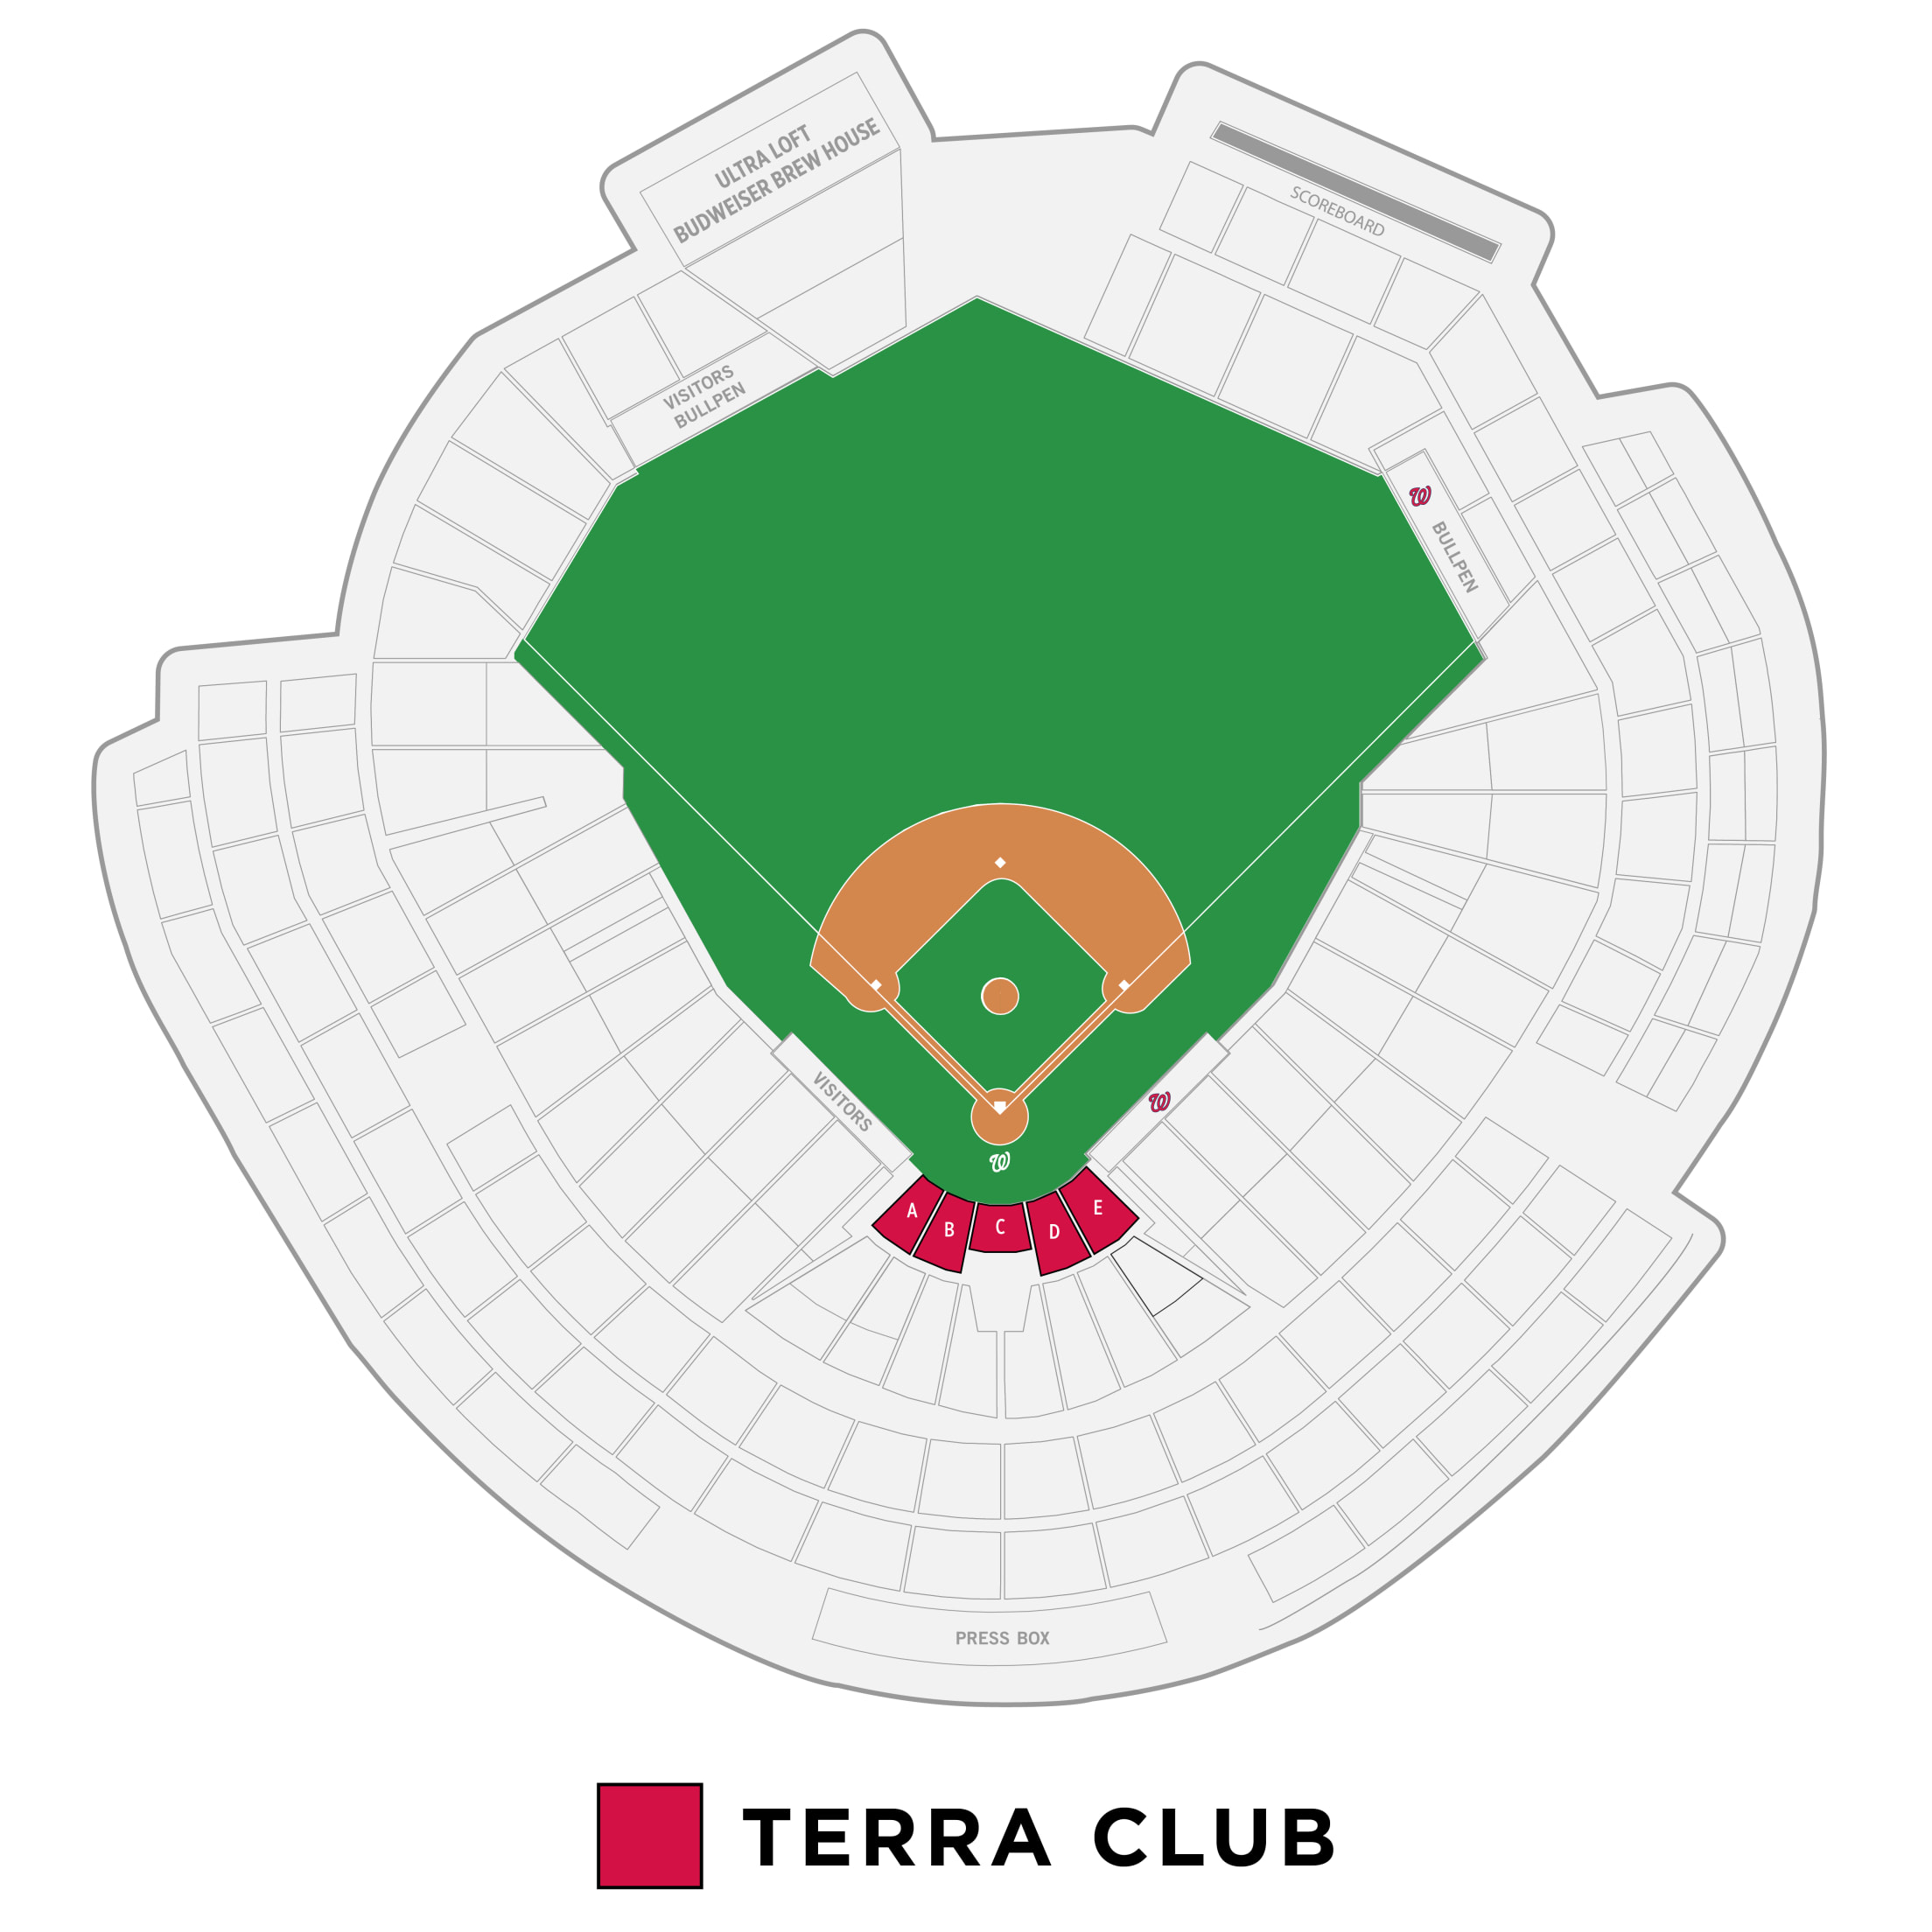 Nats Stadium Seating Chart With Rows Two Birds Home